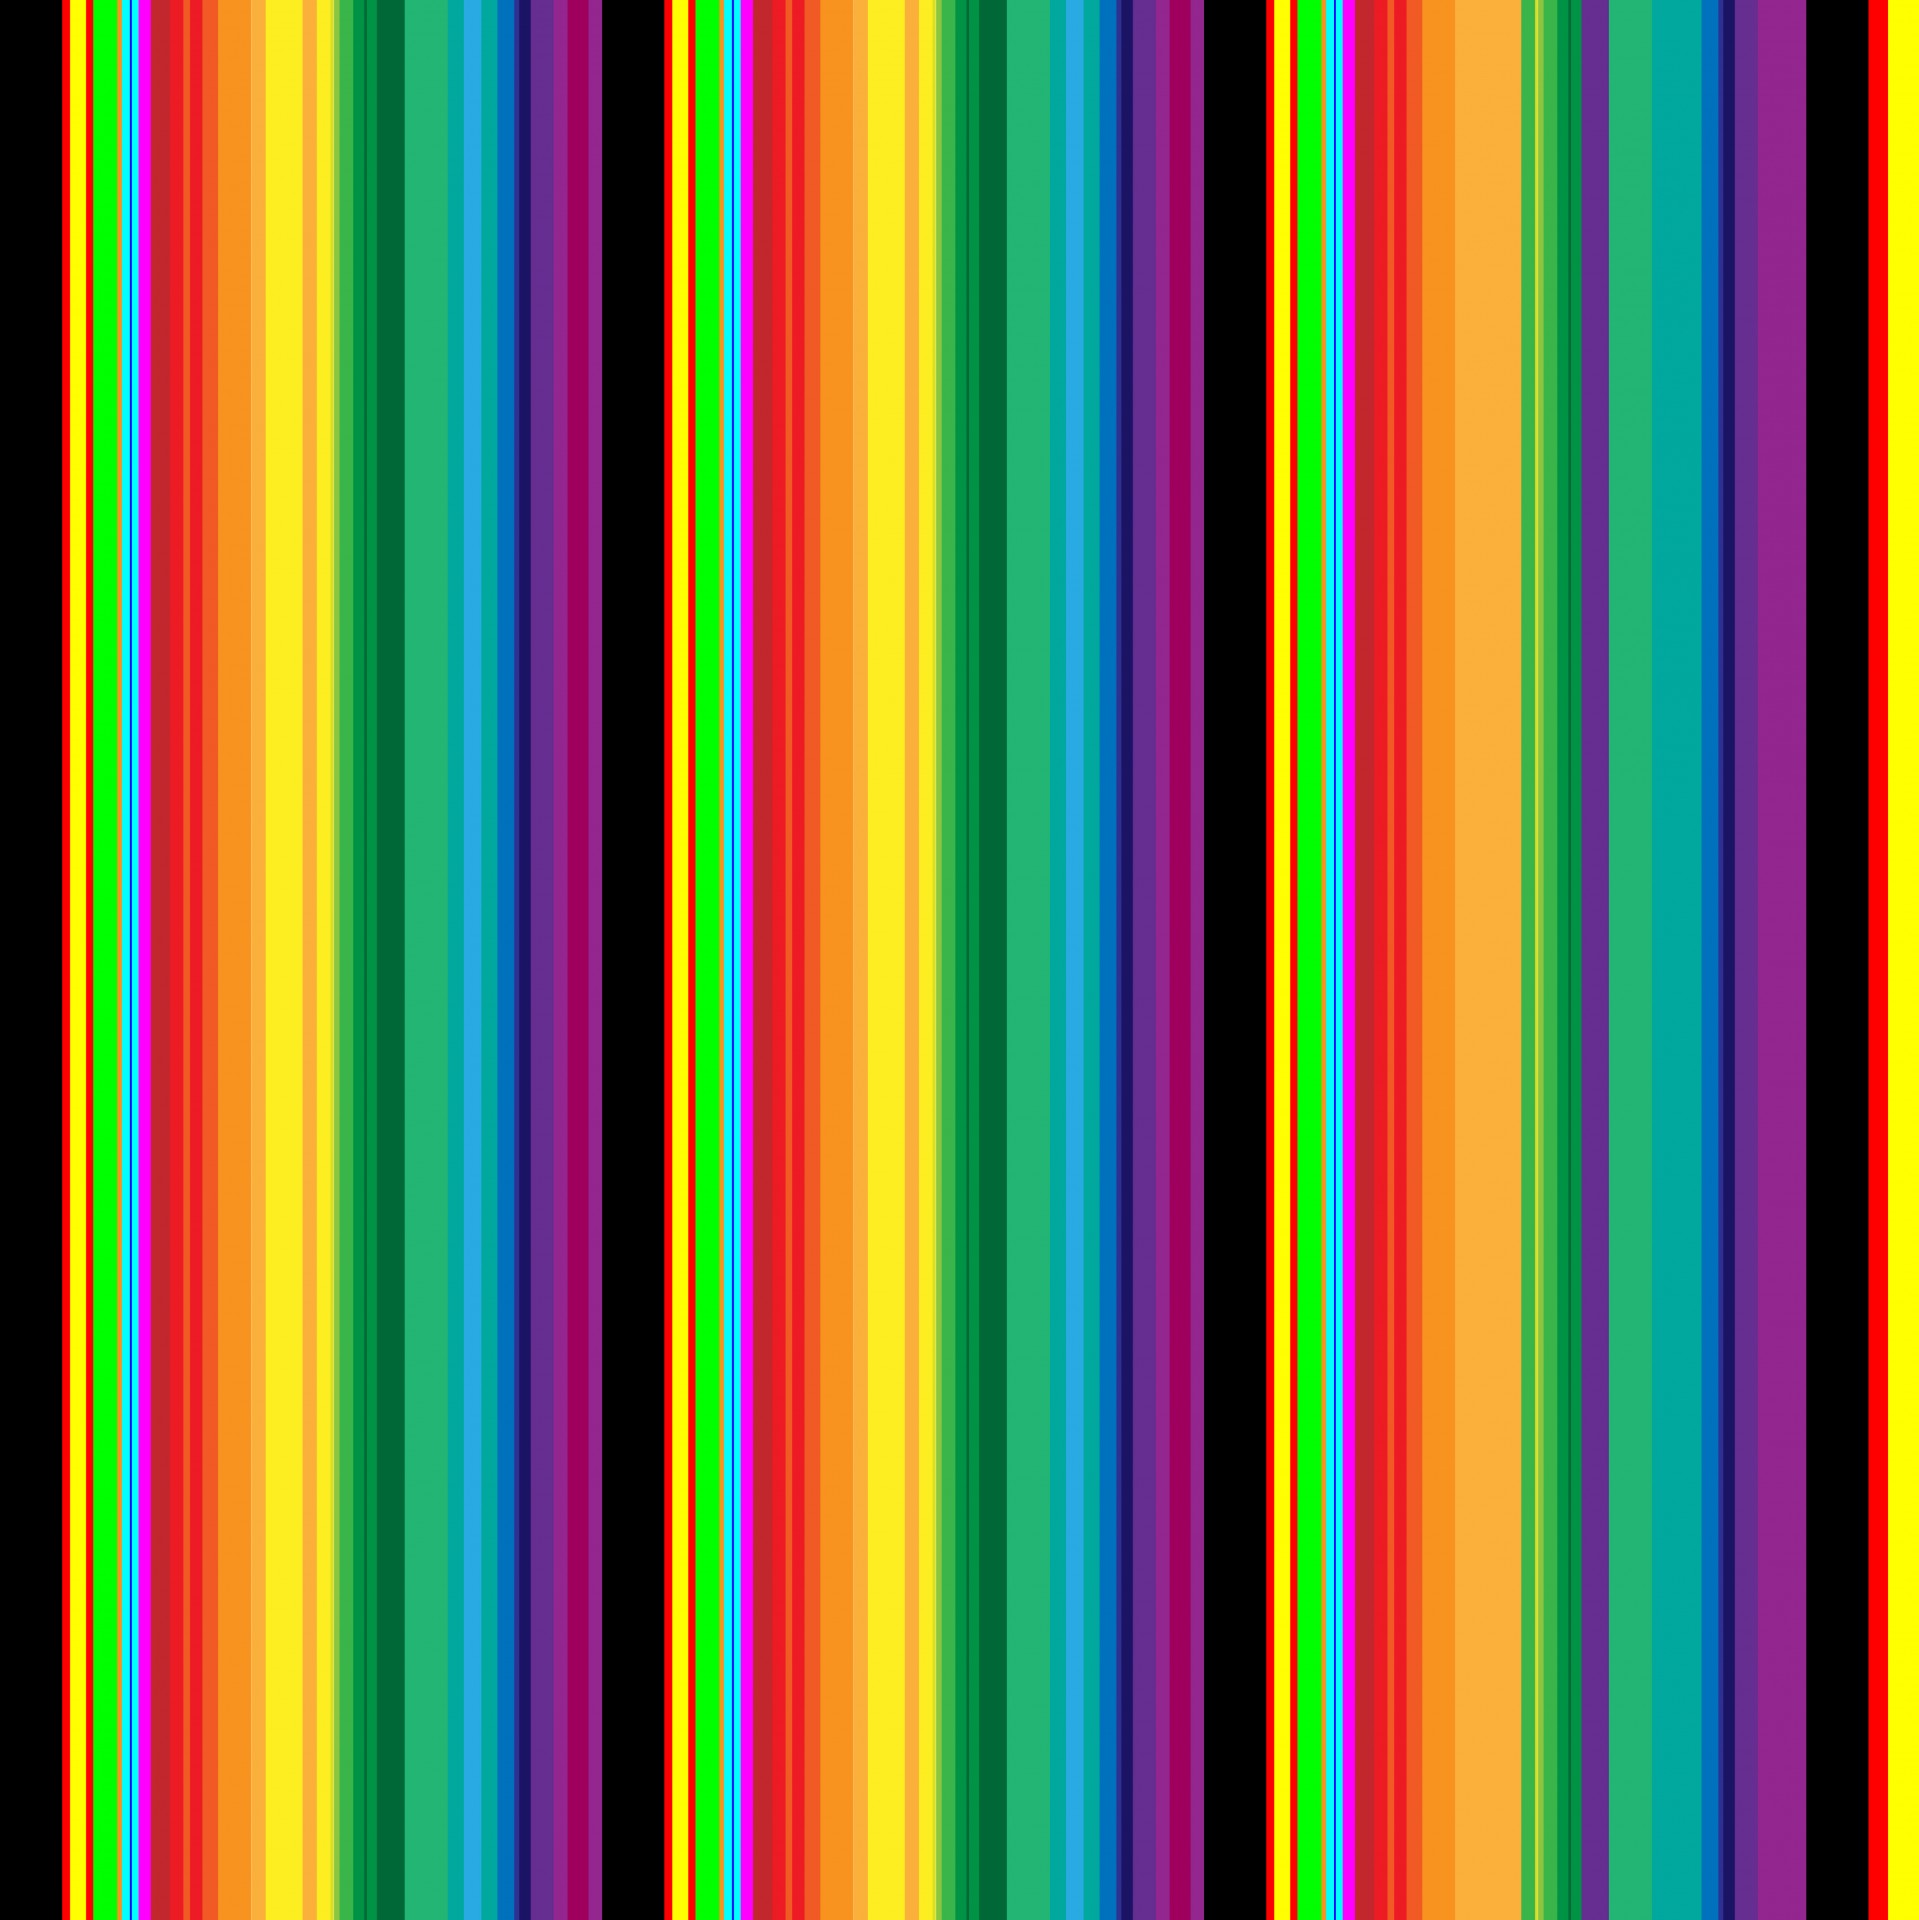 Stripes,striped,colorful,bright,wallpaper - free image from